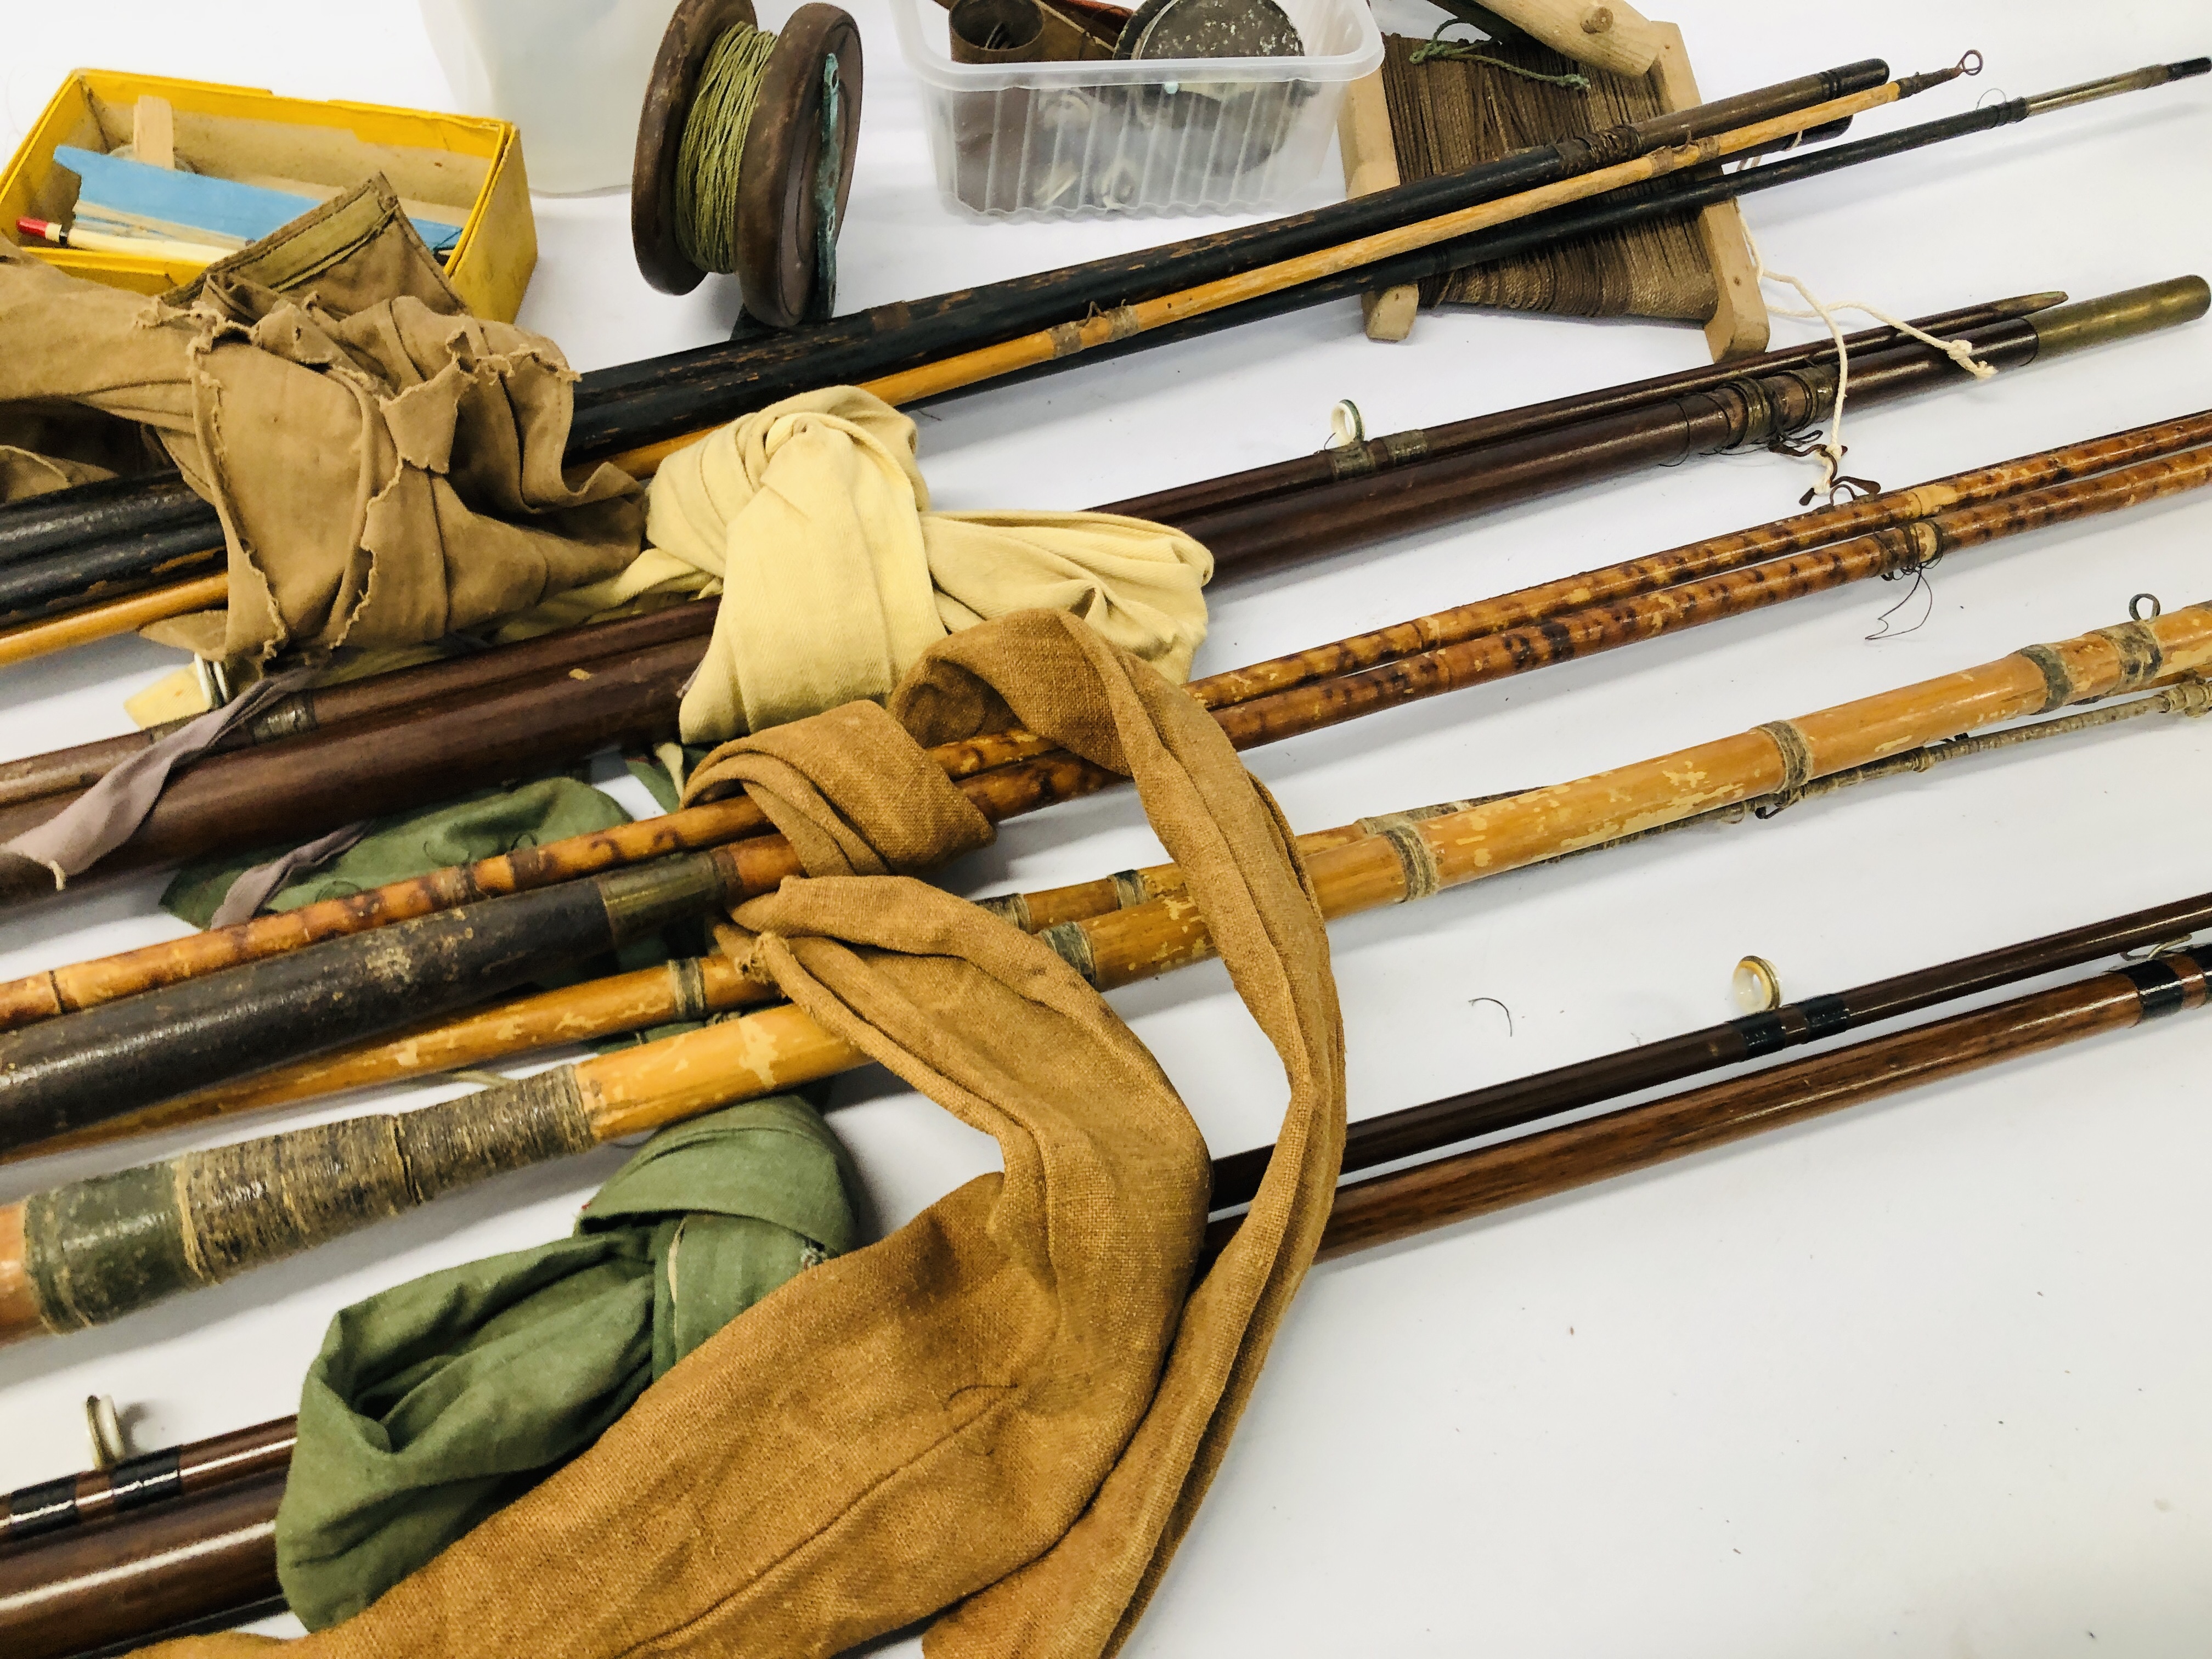 COLLECTION OF 5 X VINTAGE FISHING RODS + BOX OF ASSORTED VINTAGE FISHING REELS AND ACCESSORIES, - Image 9 of 10